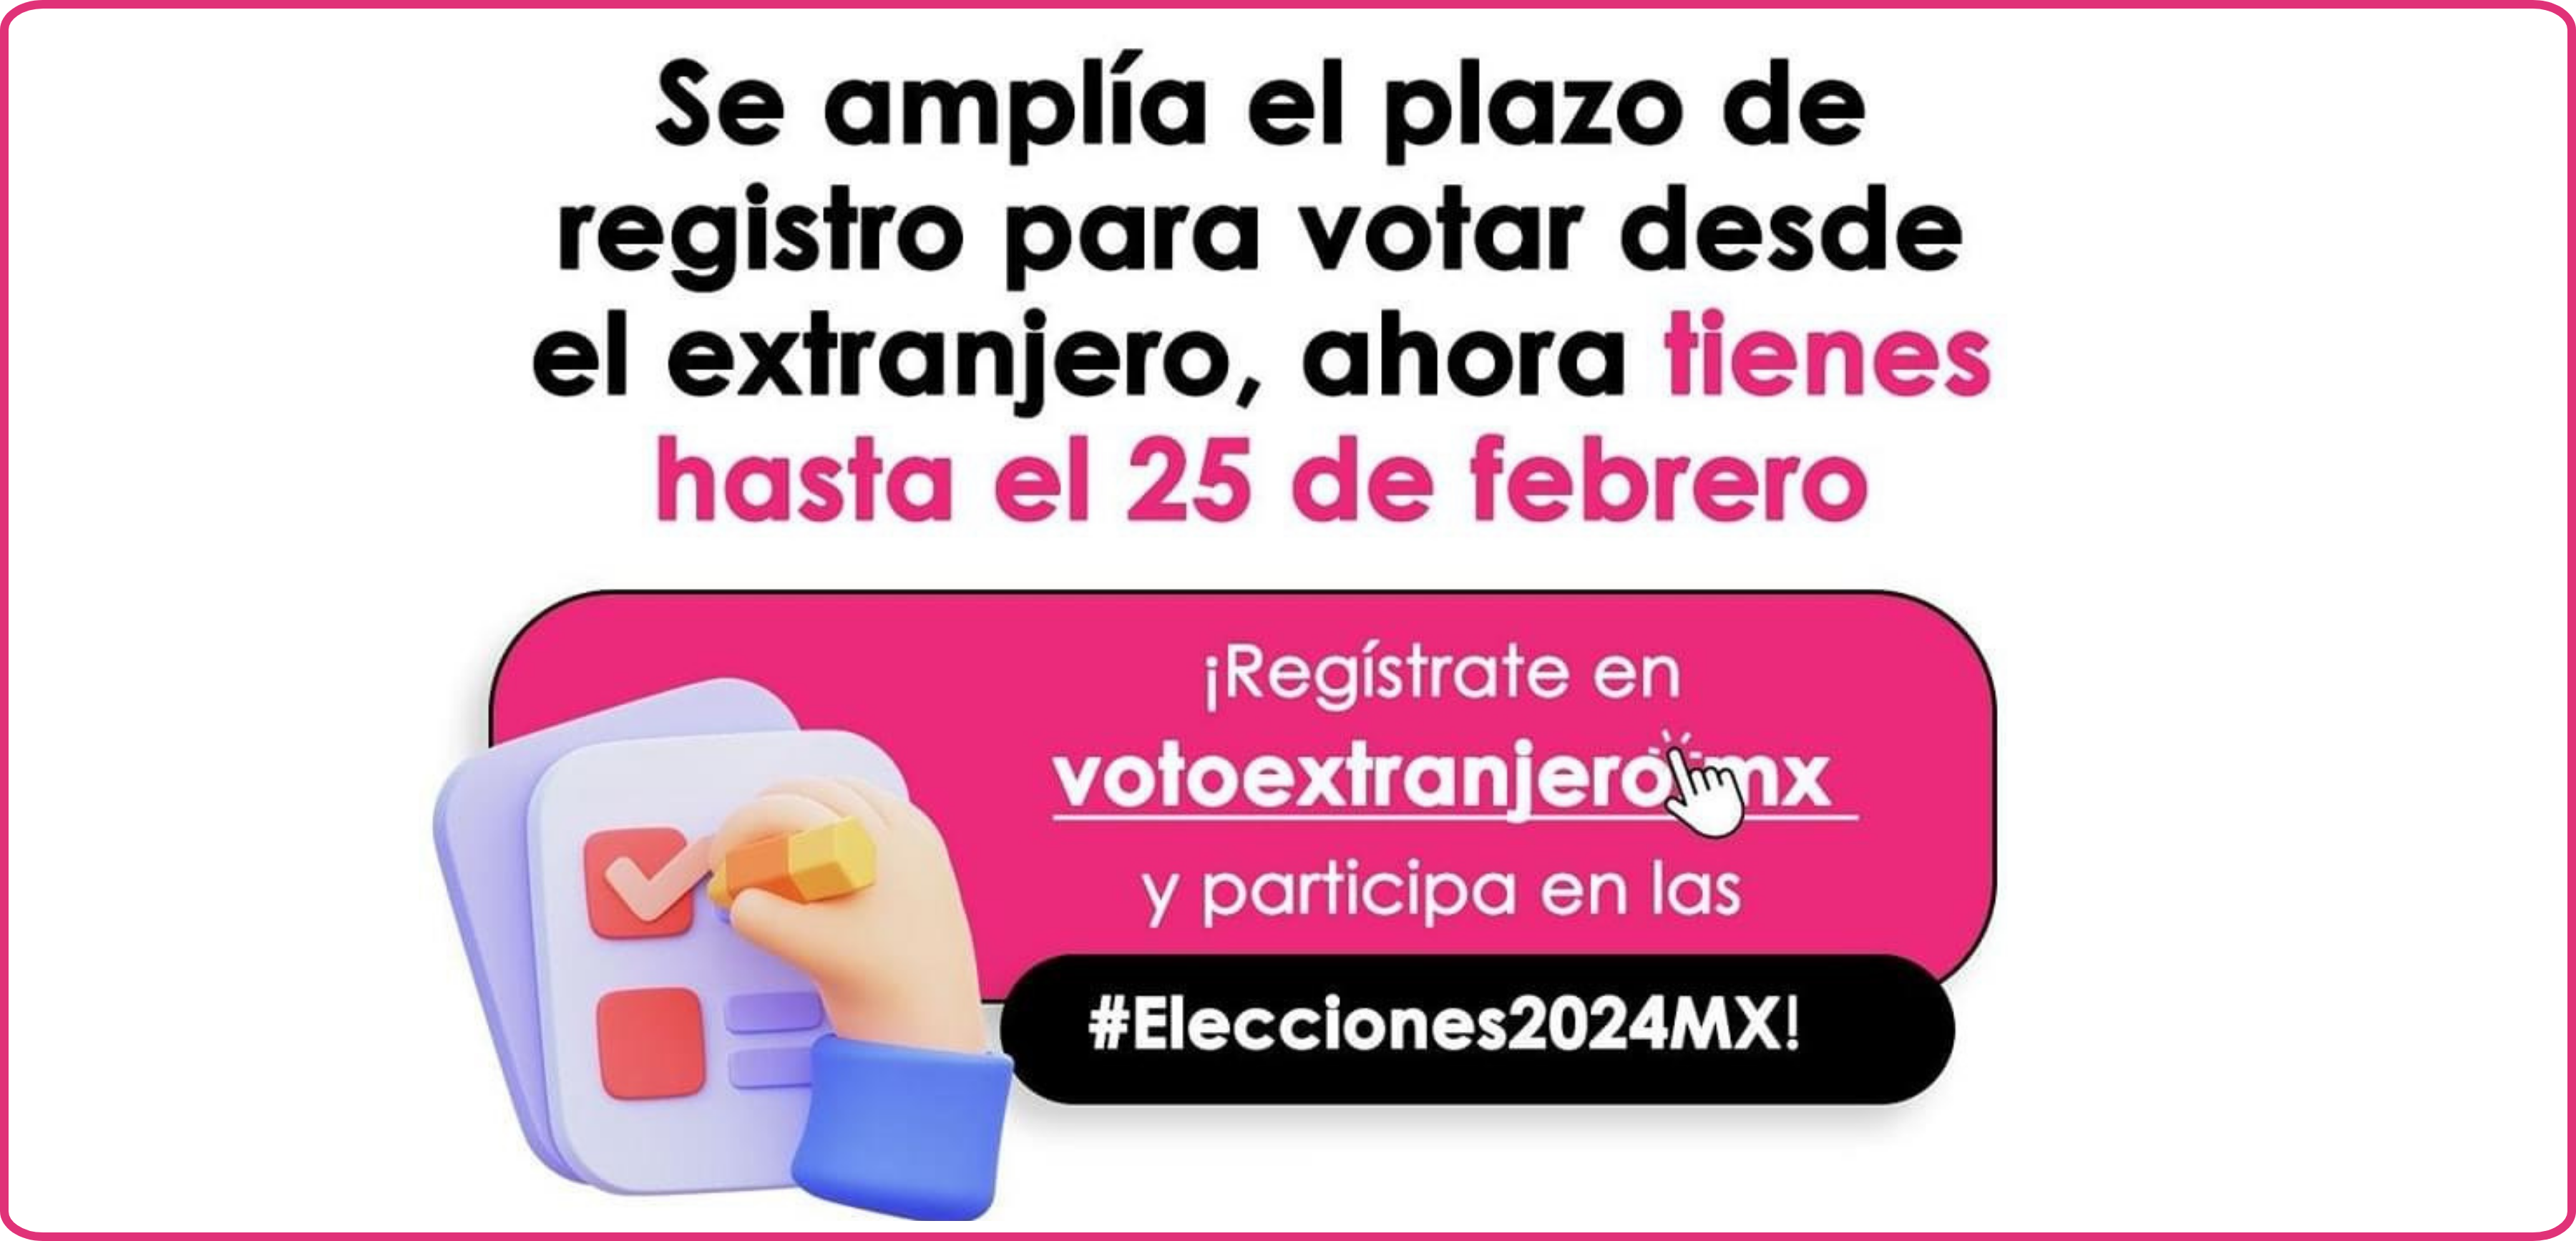 Mexico Edition: More time for voter registration